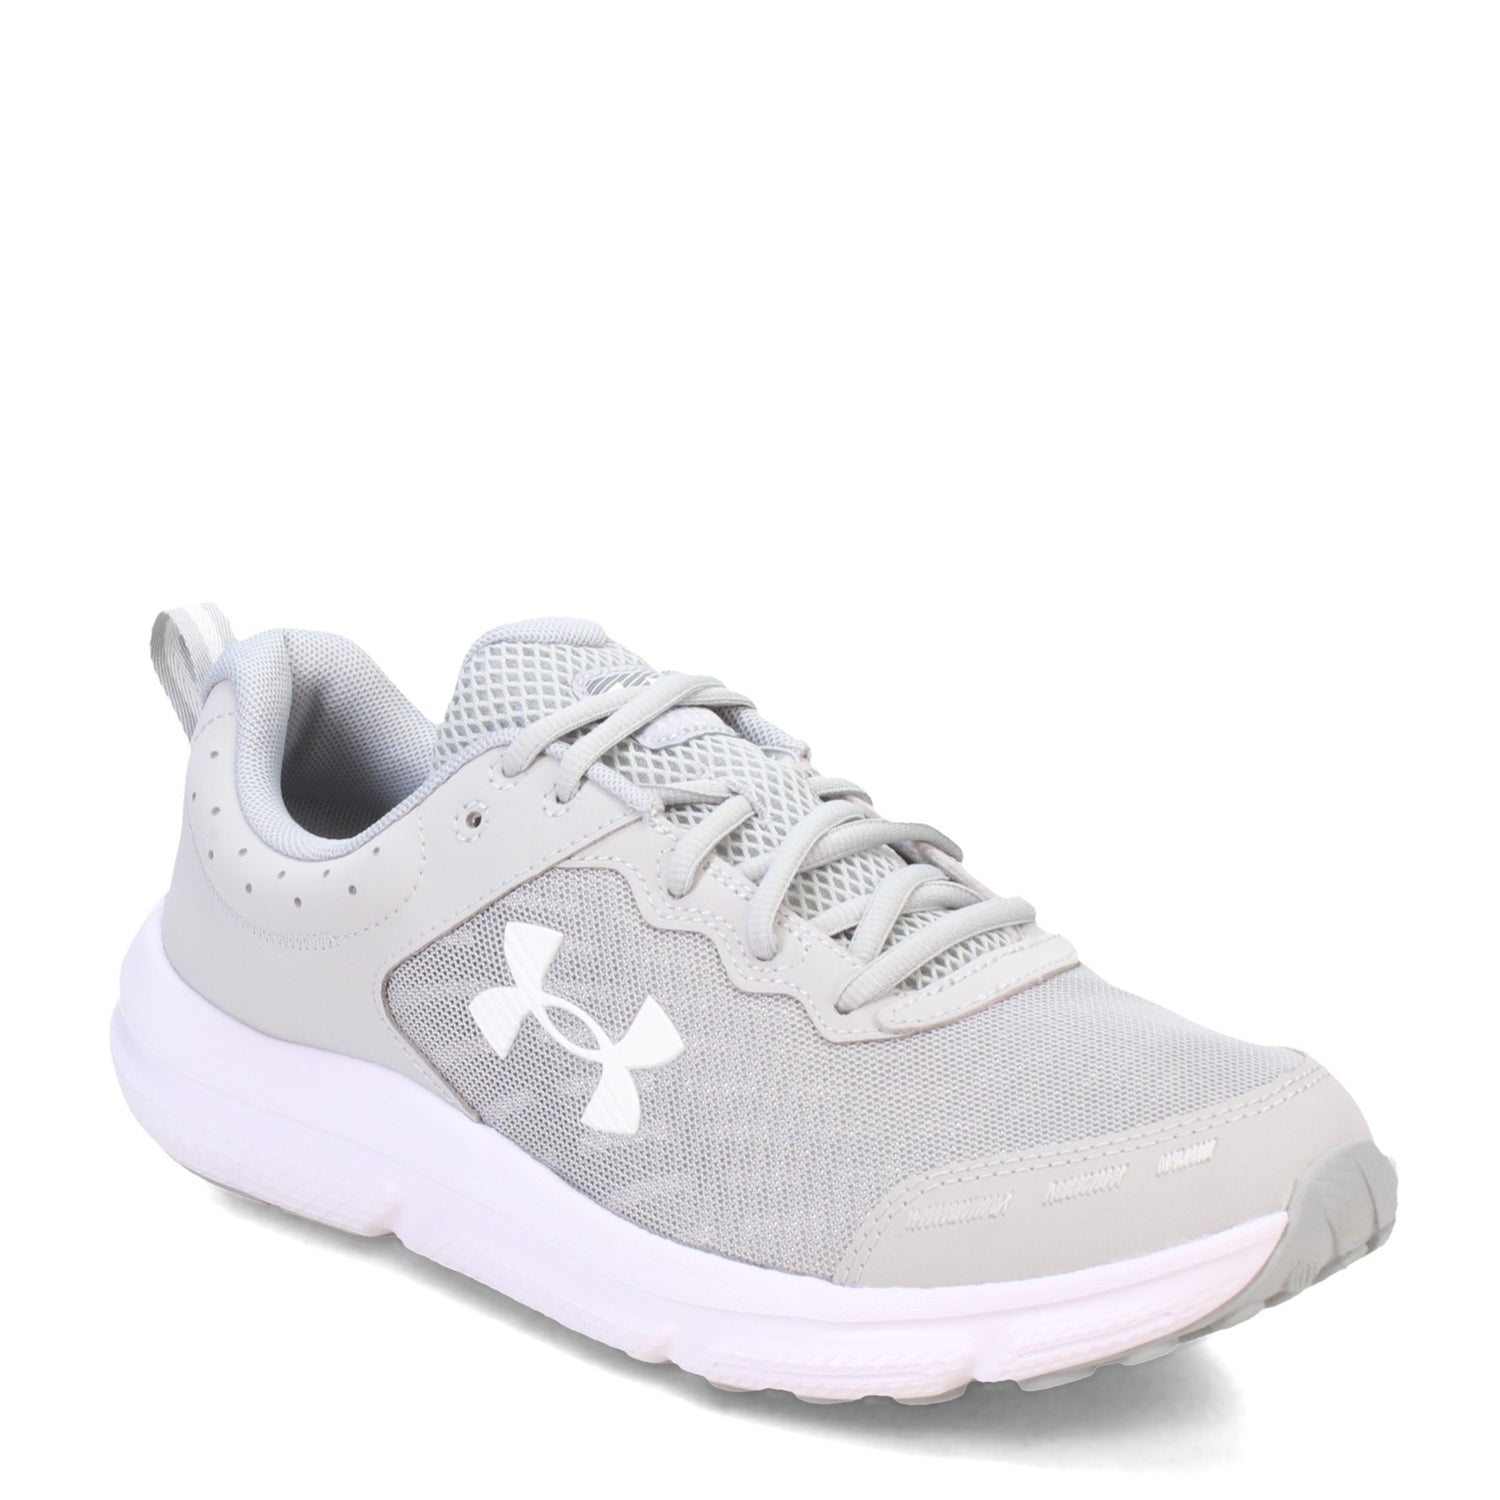 Under Armour Women's Charged Assert 9 Running Shoe, White,8.5 M US